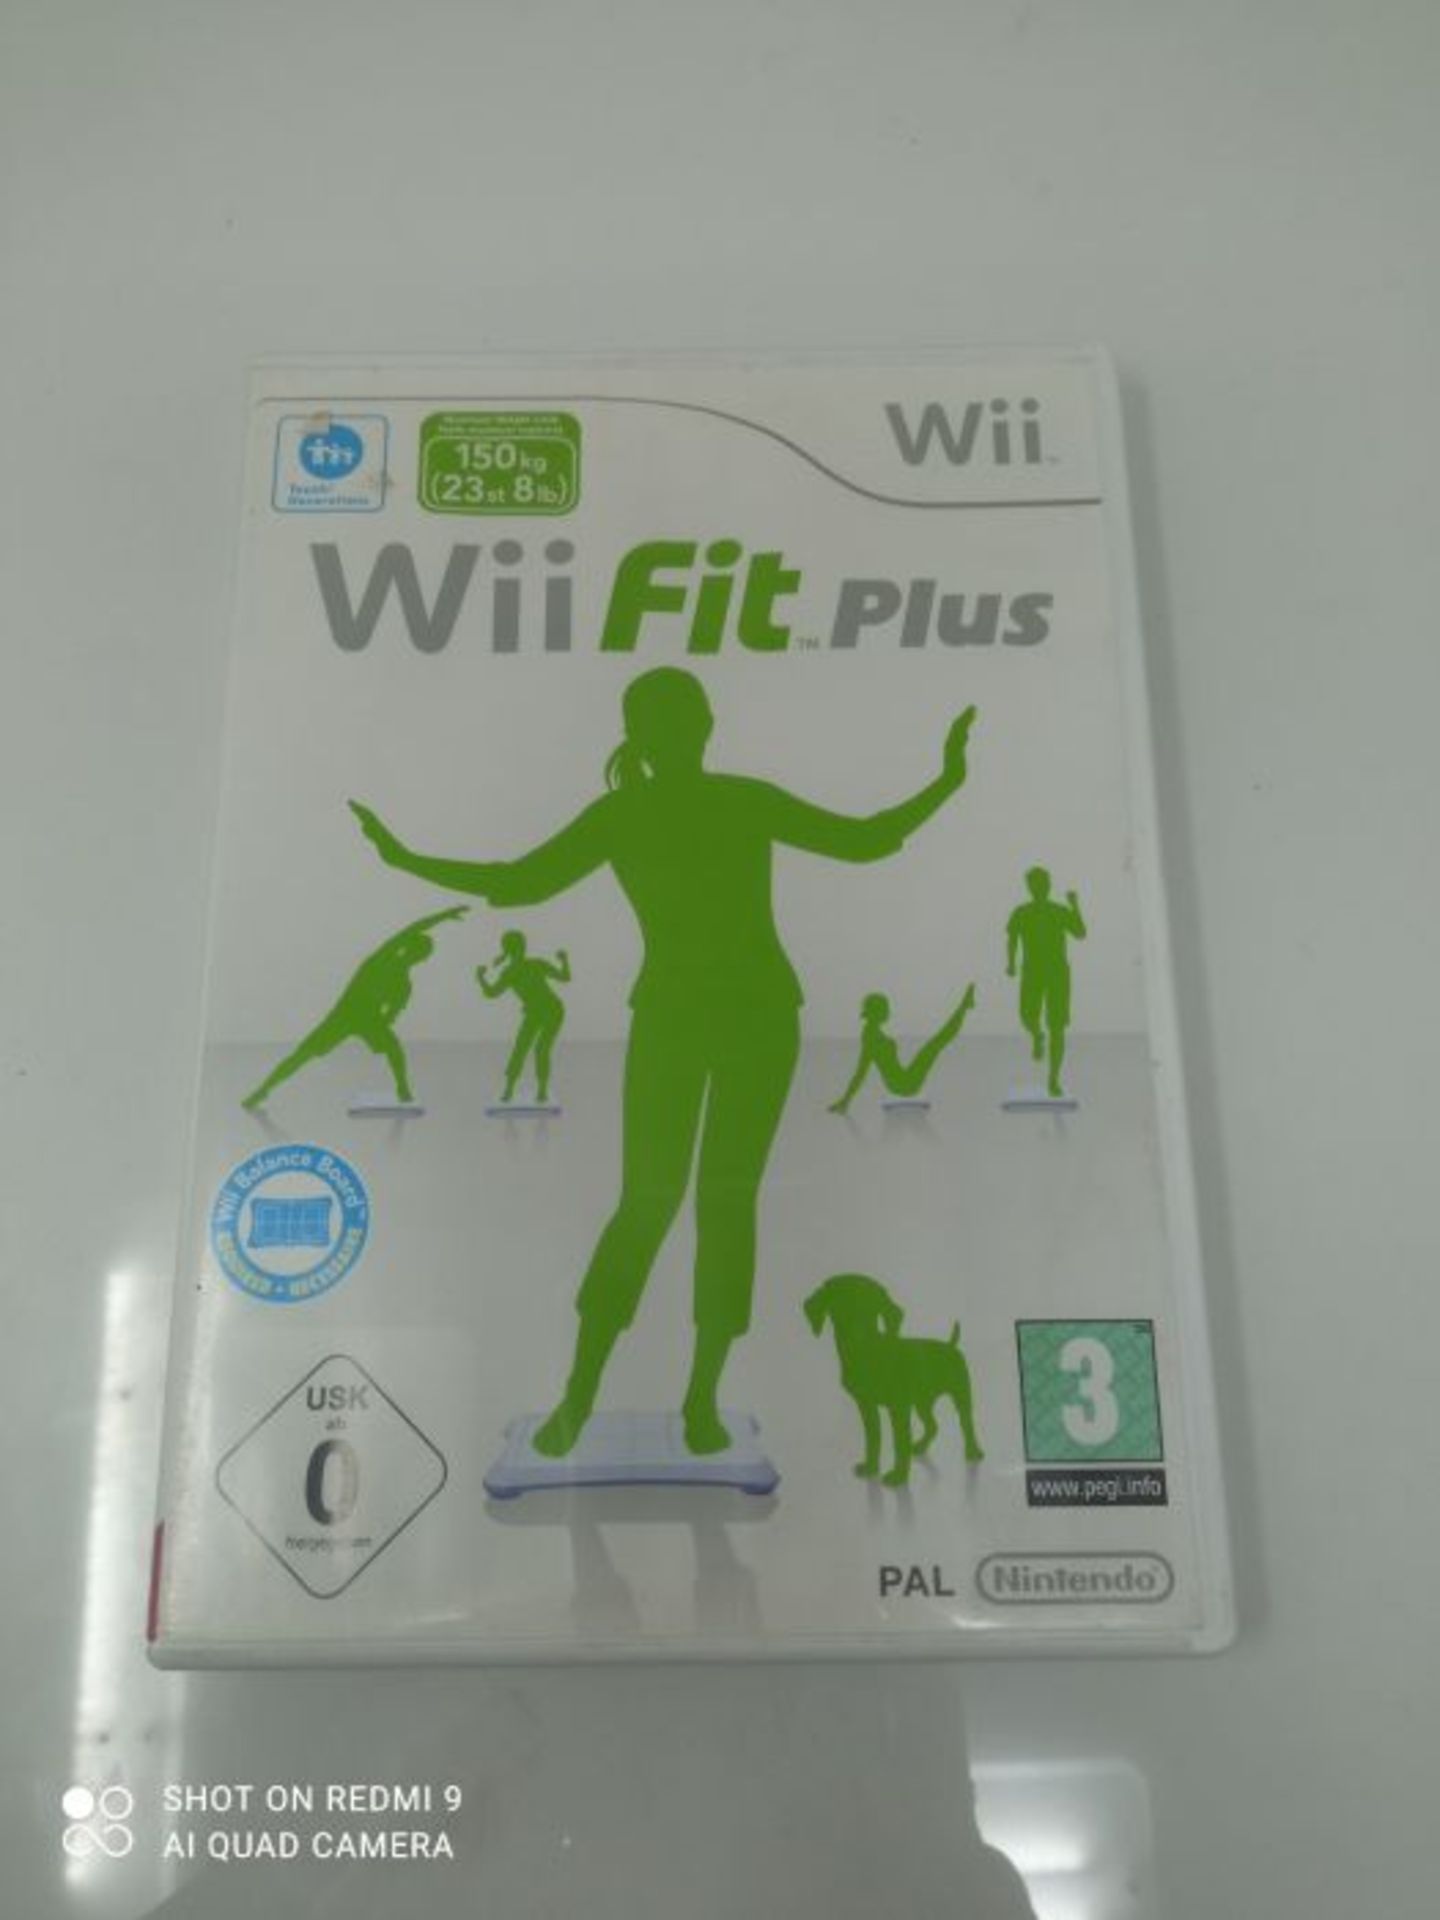 Wii Fit Plus game - Image 5 of 6